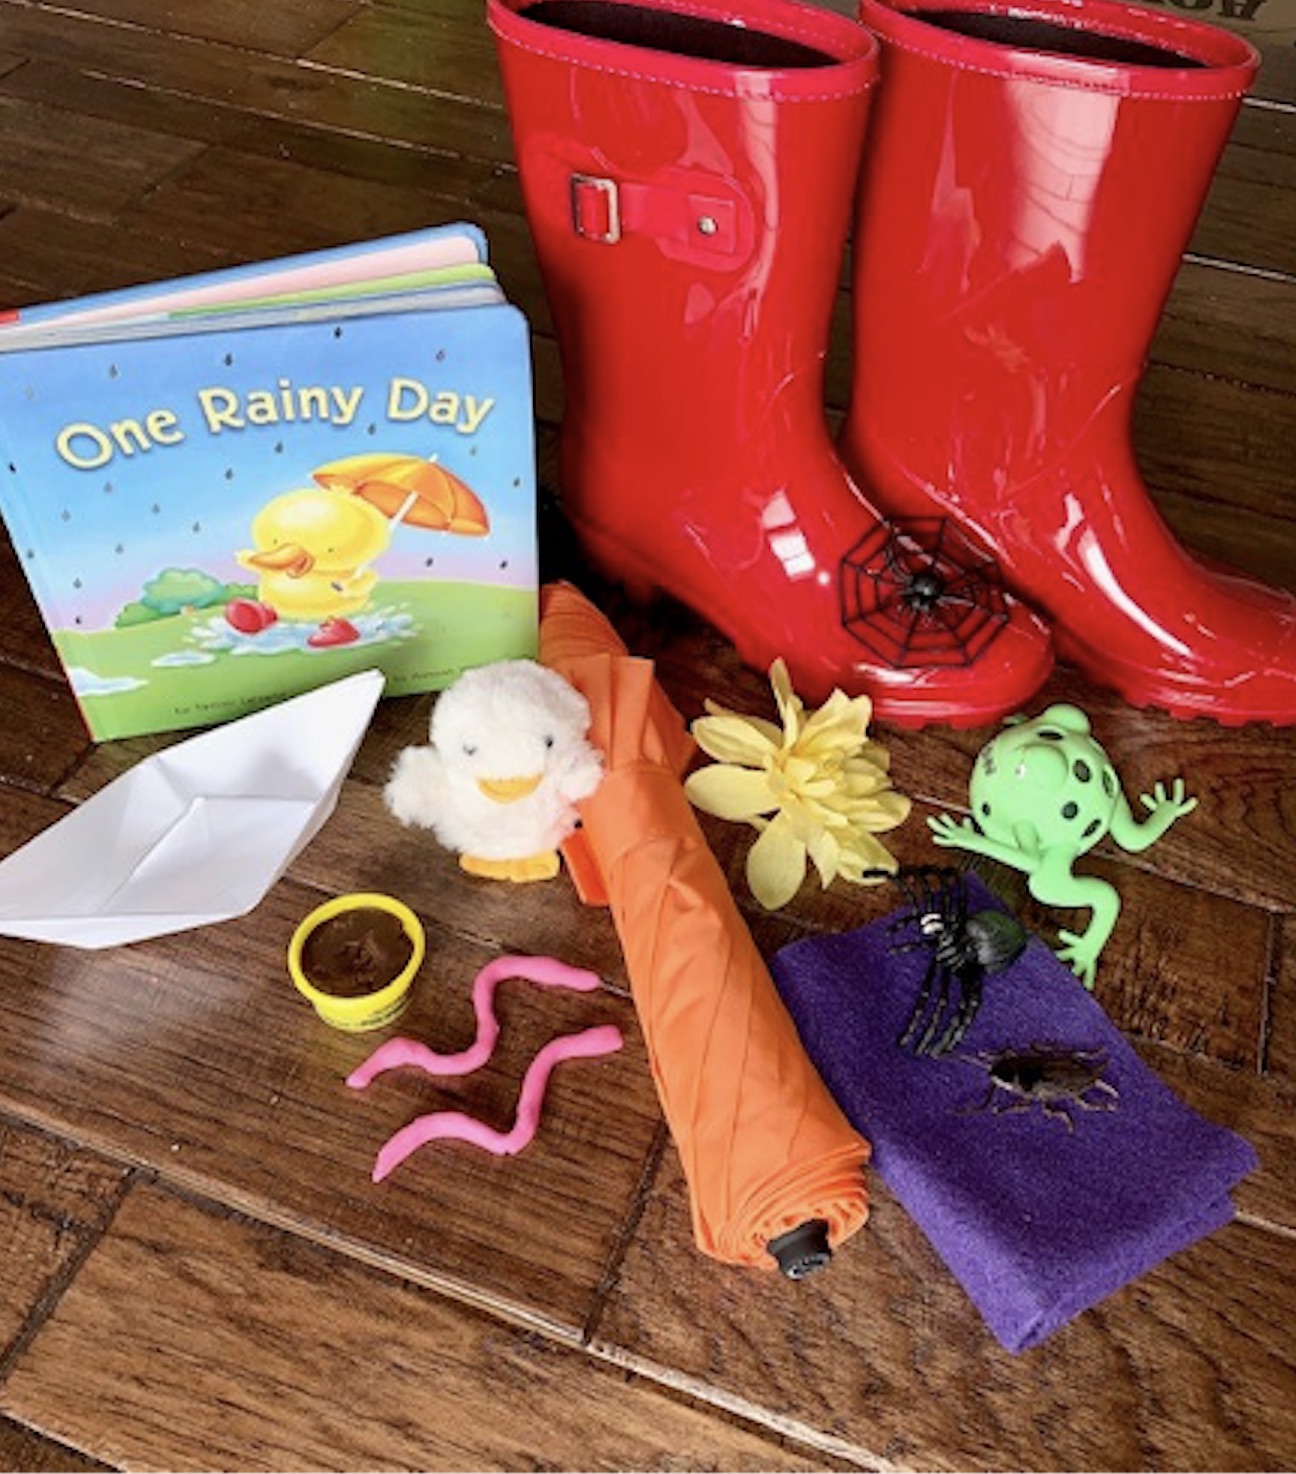 Rainy Day book with objects for story hour